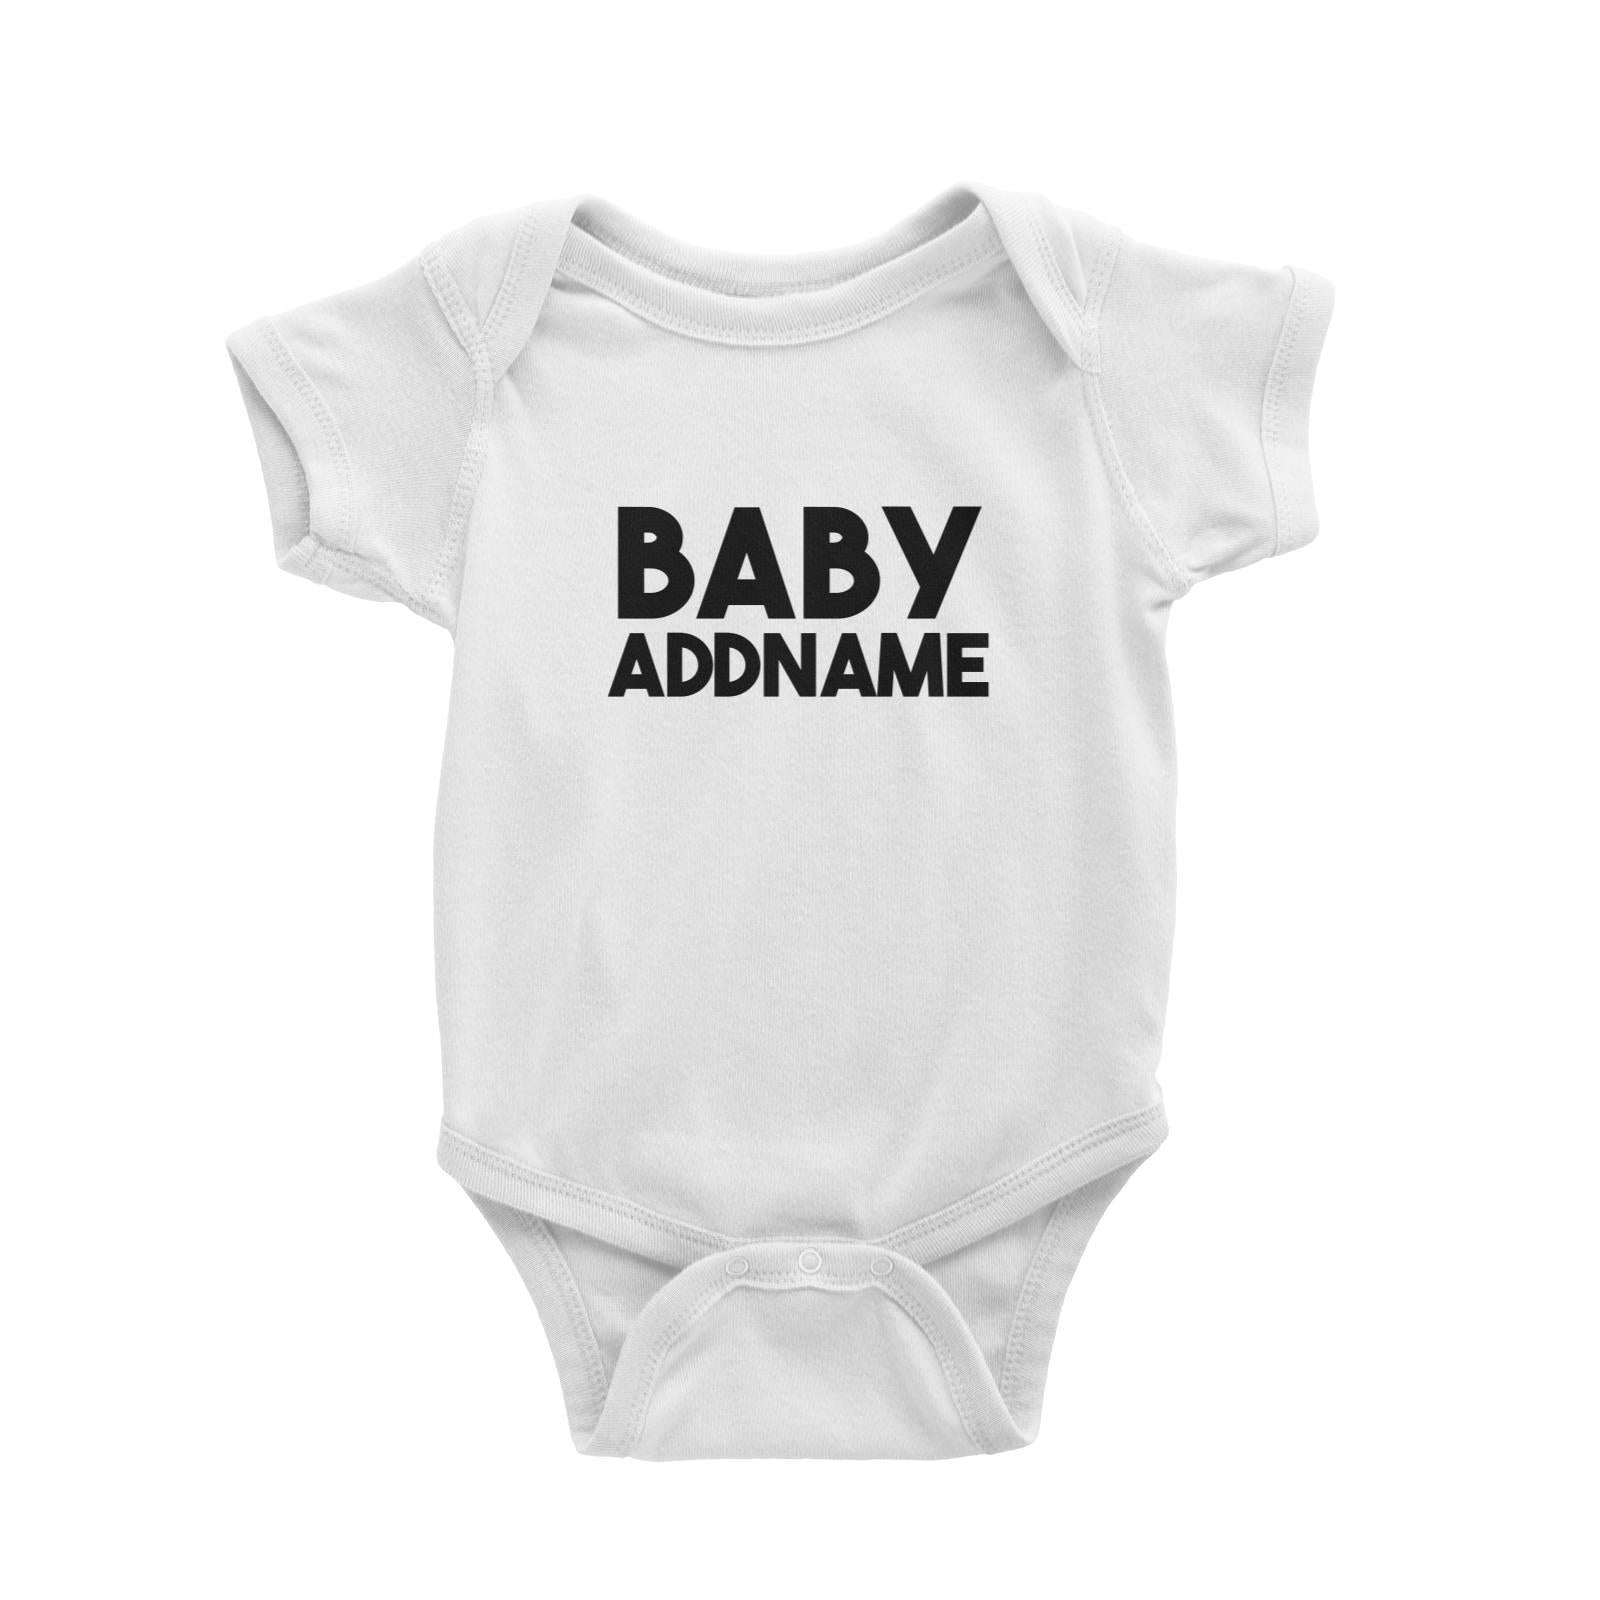 Baby Addname in Bold Letters Baby Romper Personalizable Designs Basic Newborn